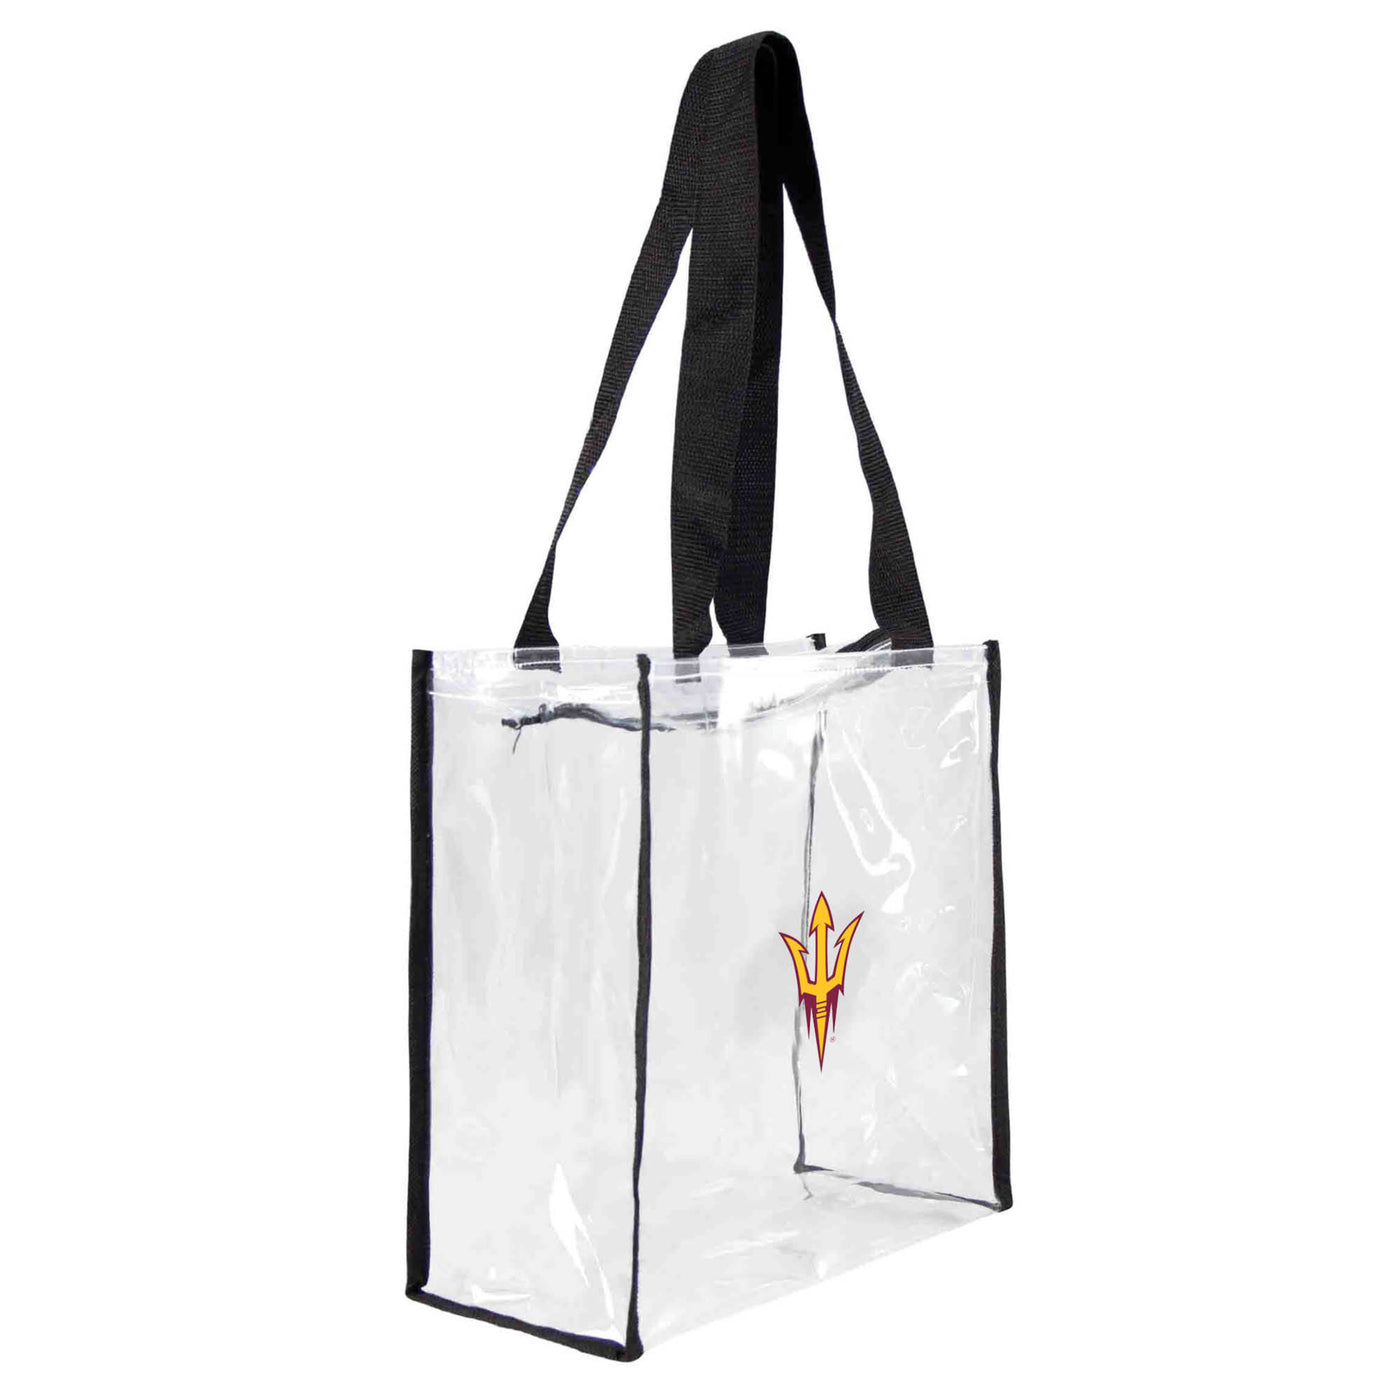 ASU clear square shaped bag with black trim/straps along with a pitchfork logo on the front